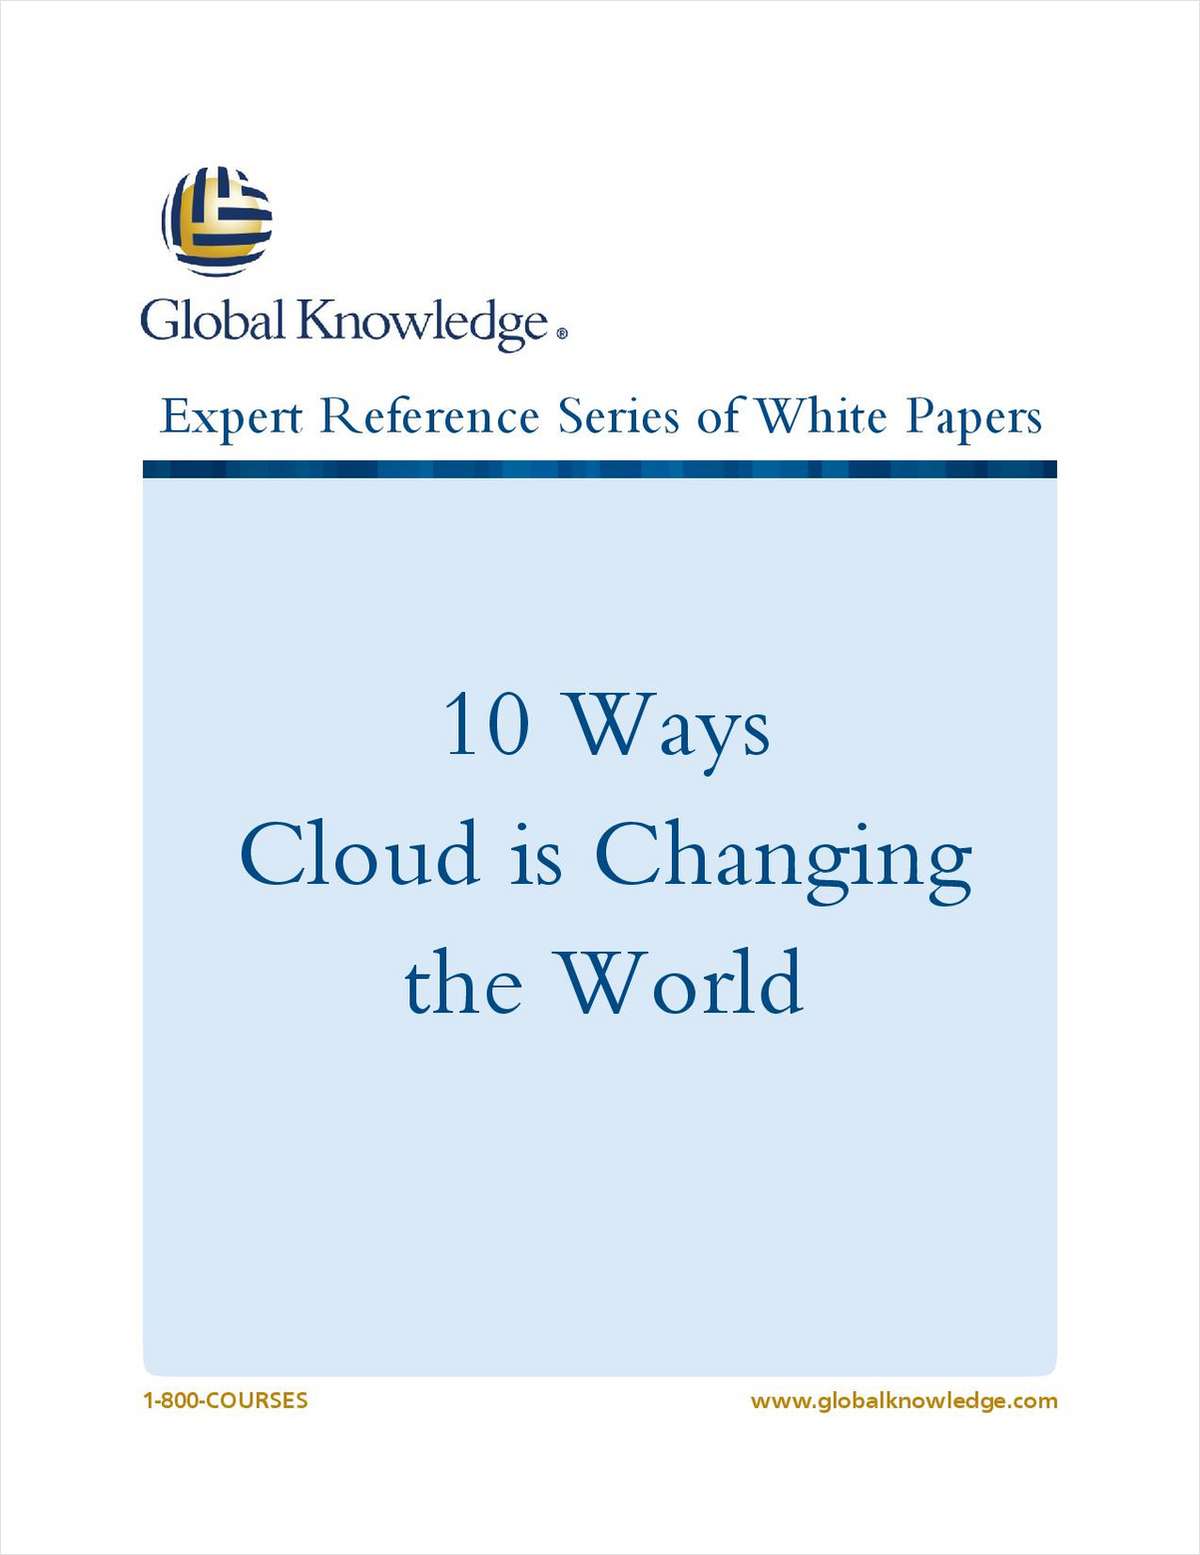 10 Ways Cloud is Changing the World